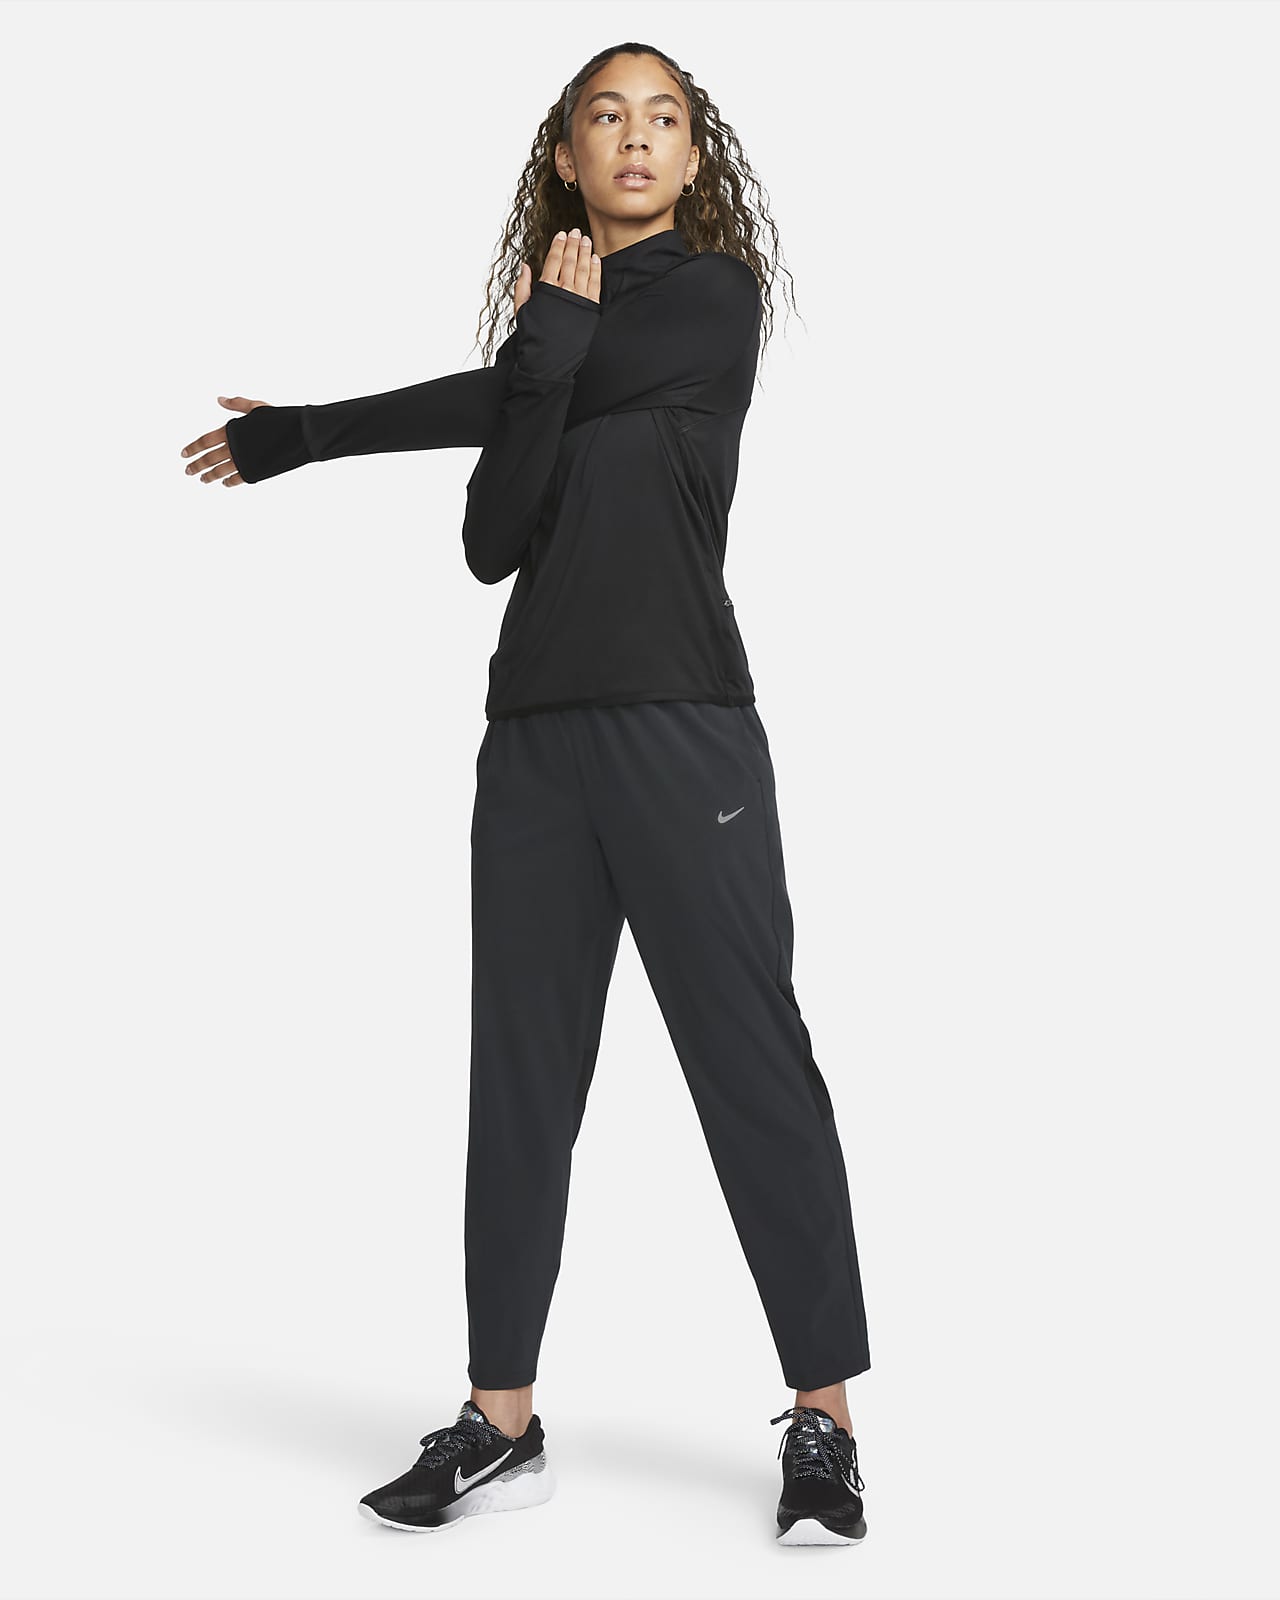 Nike ThermaFit Run Division Pants  Running Trousers Womens  Free UK  Delivery  Alpinetrekcouk